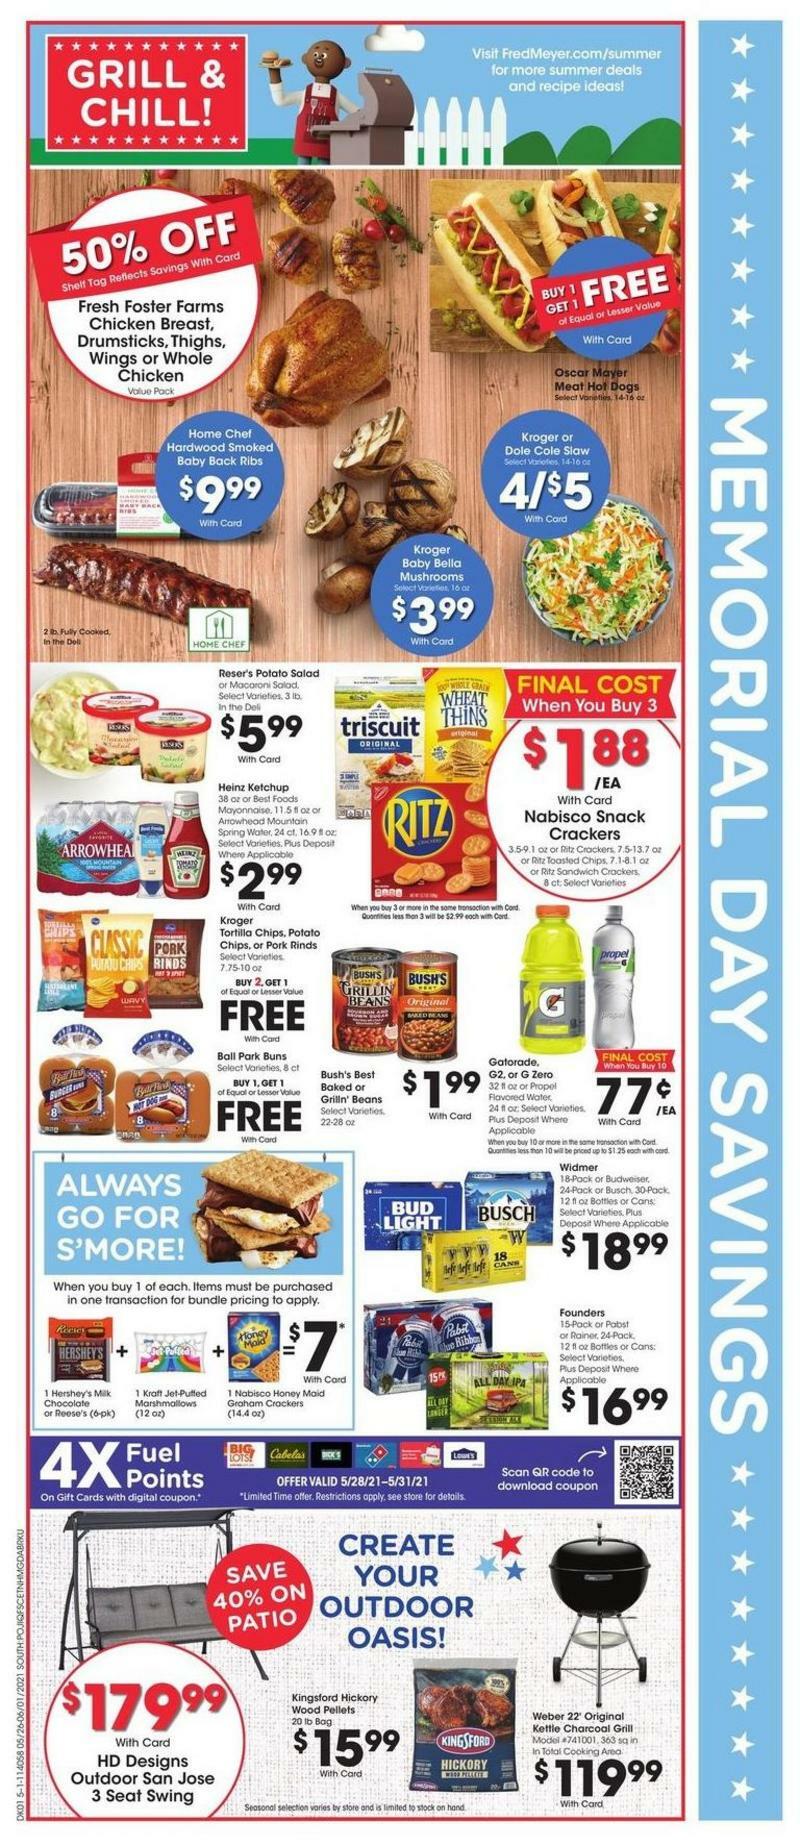 Fred Meyer Weekly Ad from May 26